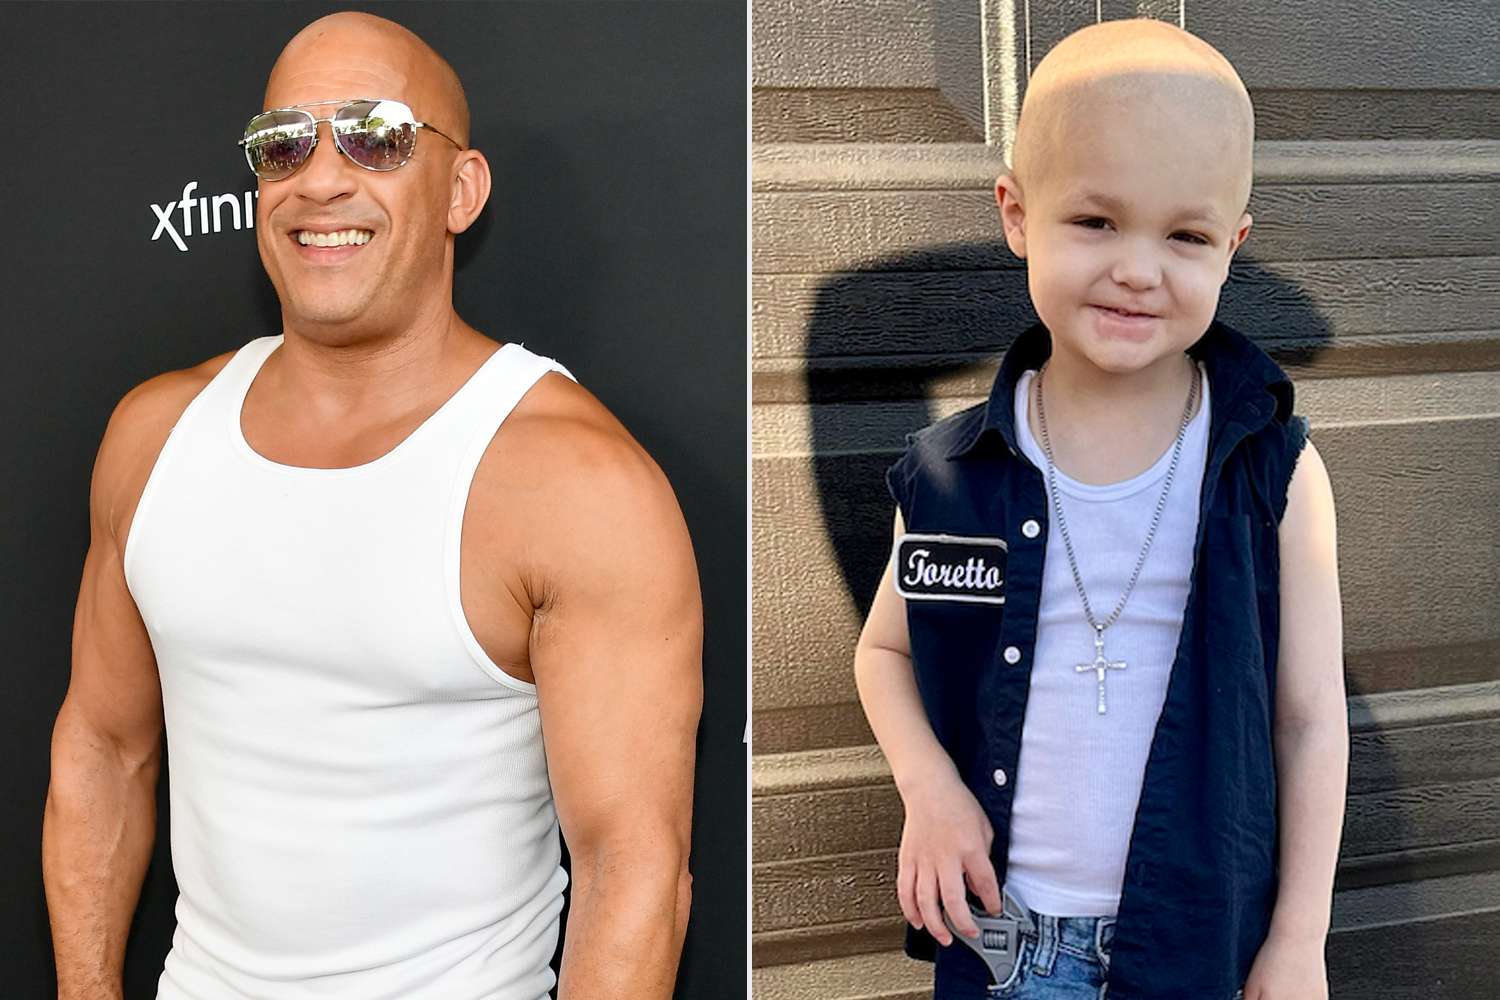 Vin Diesel Surprises 4-Year-Old “Fast & Furious” Superfan After Leukemia Treatment